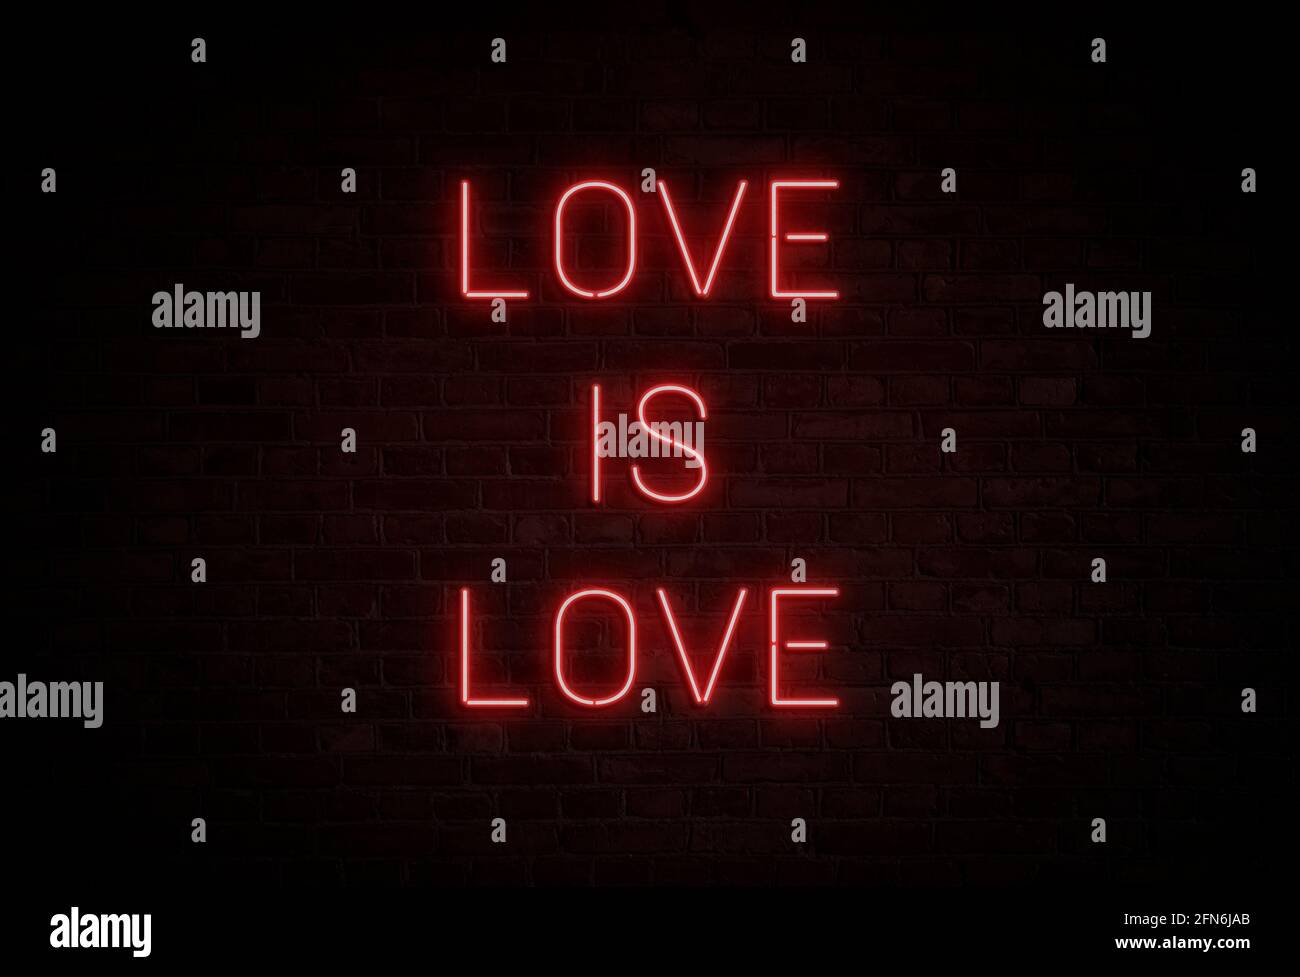 Illuminated and glowing 'LOVE IS LOVE' red neon sign on dark brick wall. Stock Photo